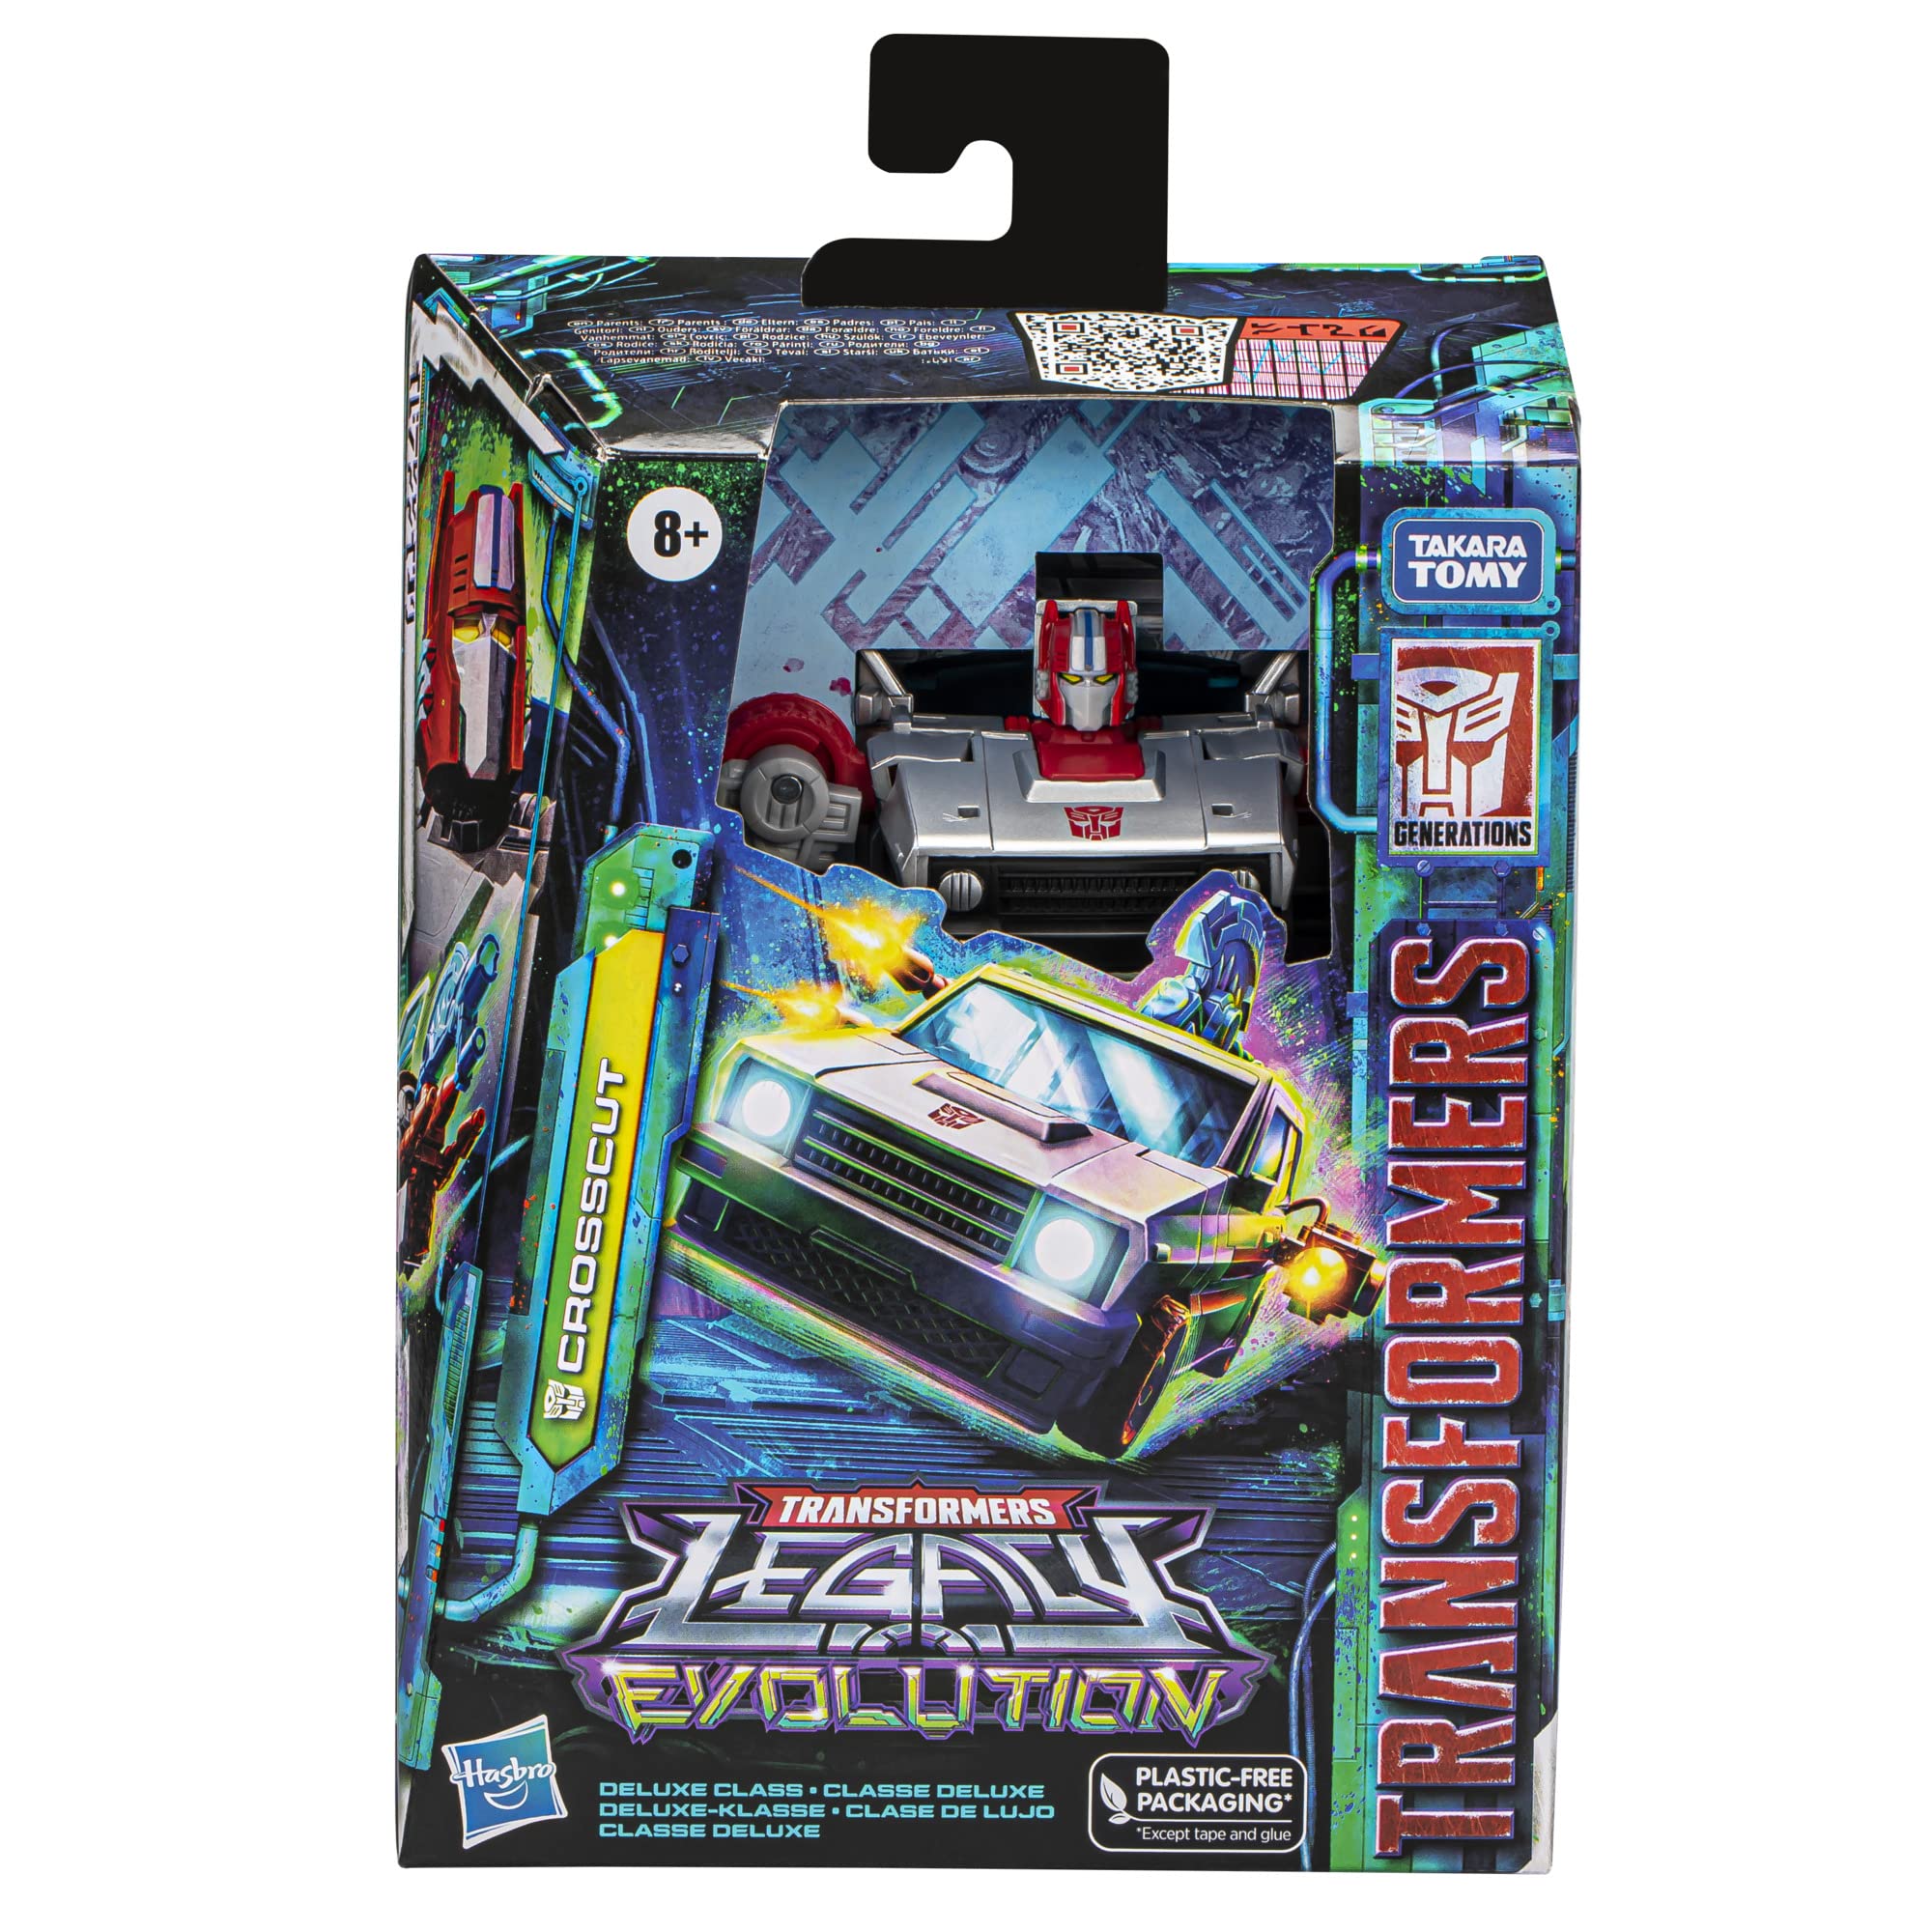 Transformers Toys Legacy Evolution Deluxe Crosscut Toy, 5.5-inch, Action Figure for Boys and Girls Ages 8 and Up